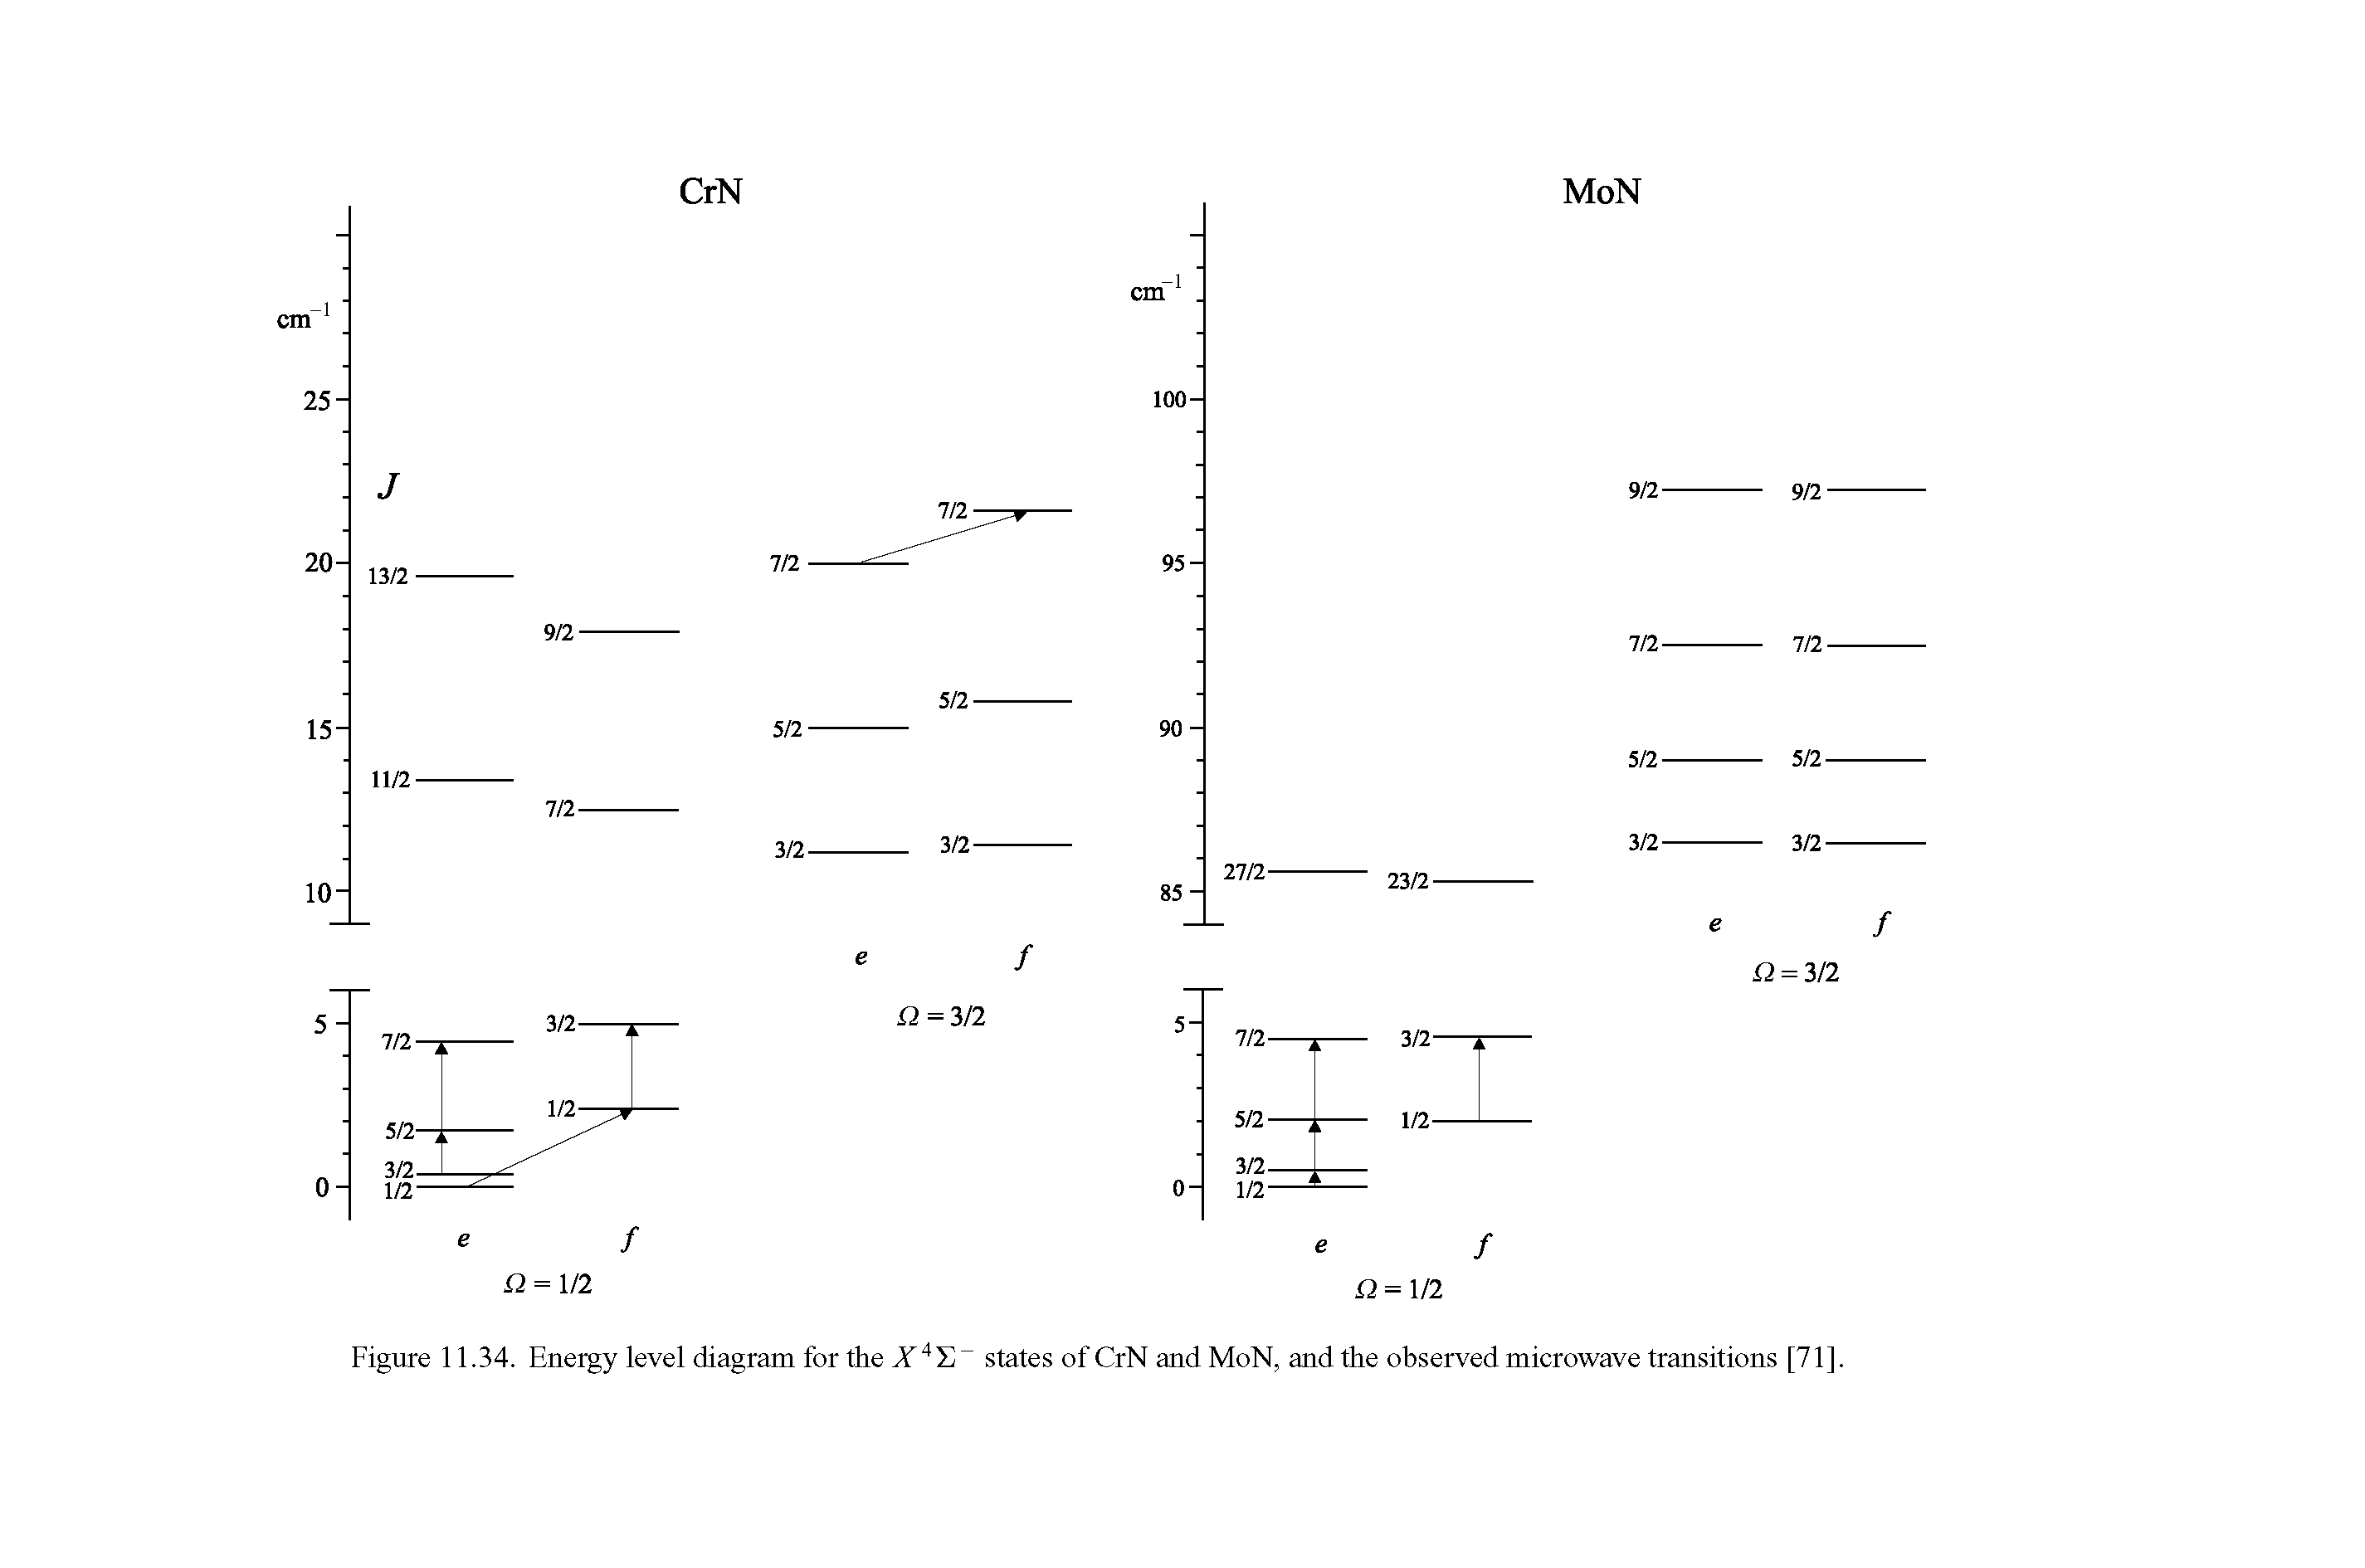 Figure 11.34. Energy level diagram for the X4 states of CrN and MoN, and the observed microwave transitions [71].